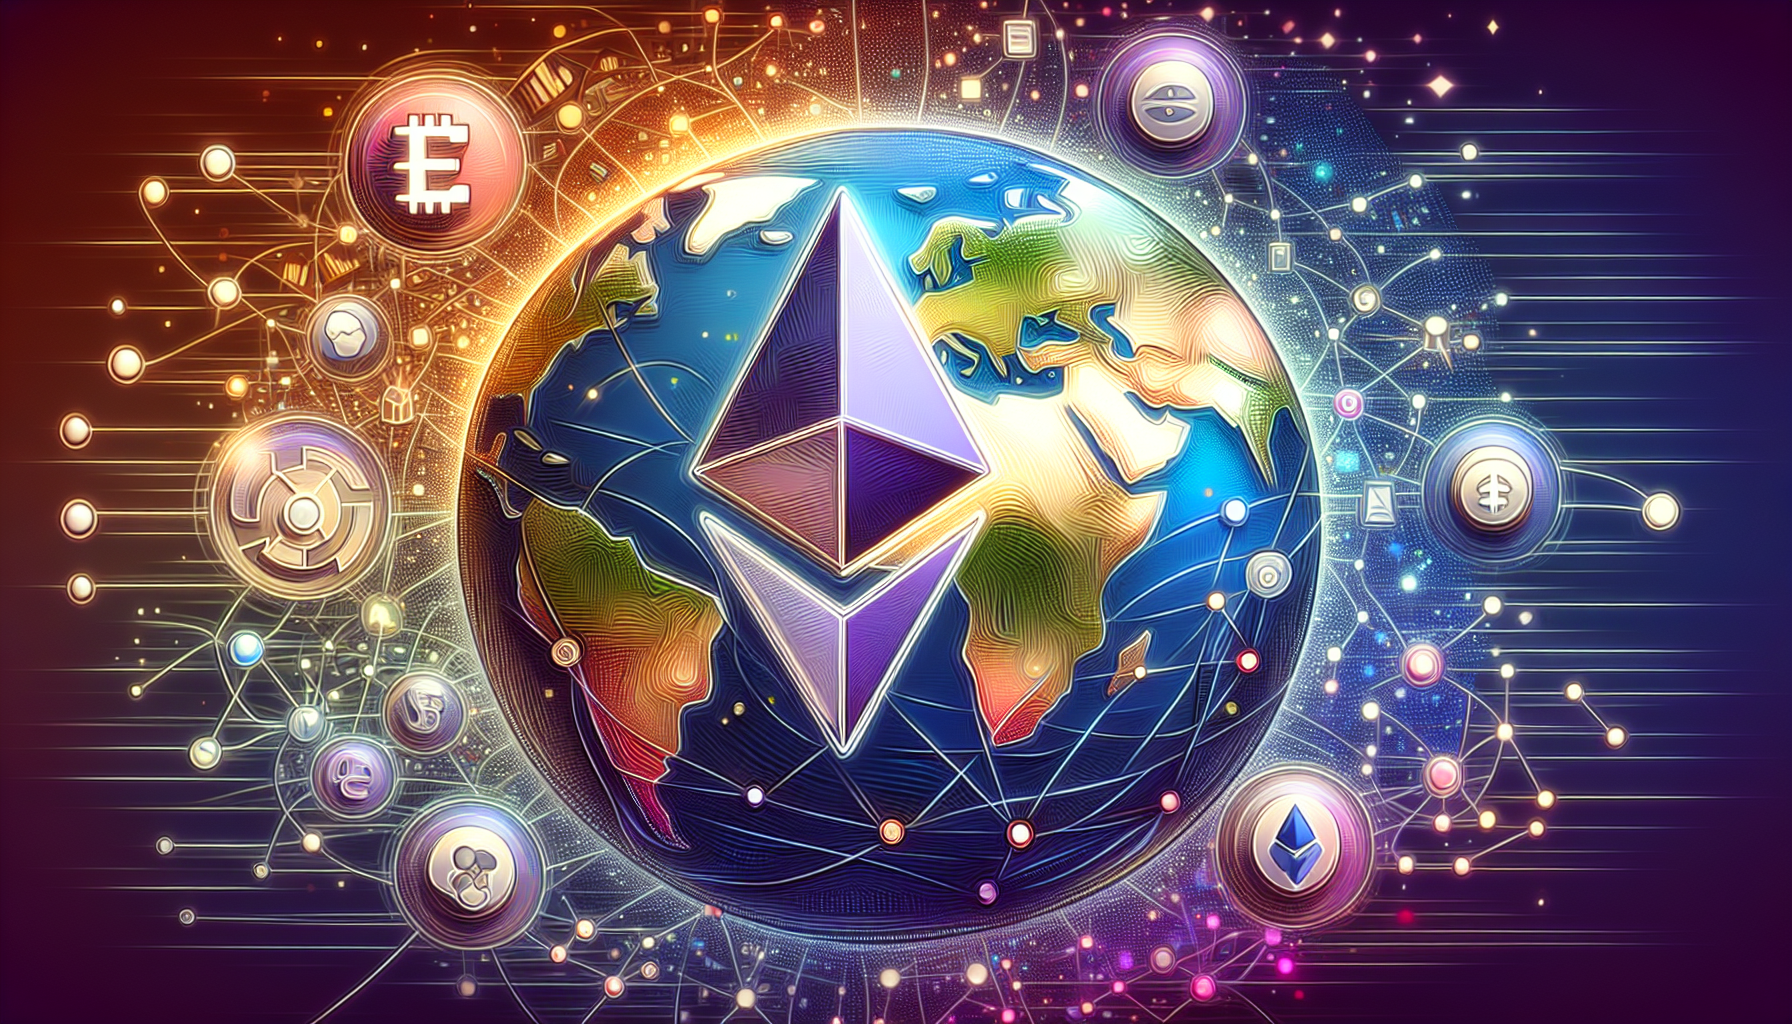 Illustration of global perspectives on Ethereum's classification